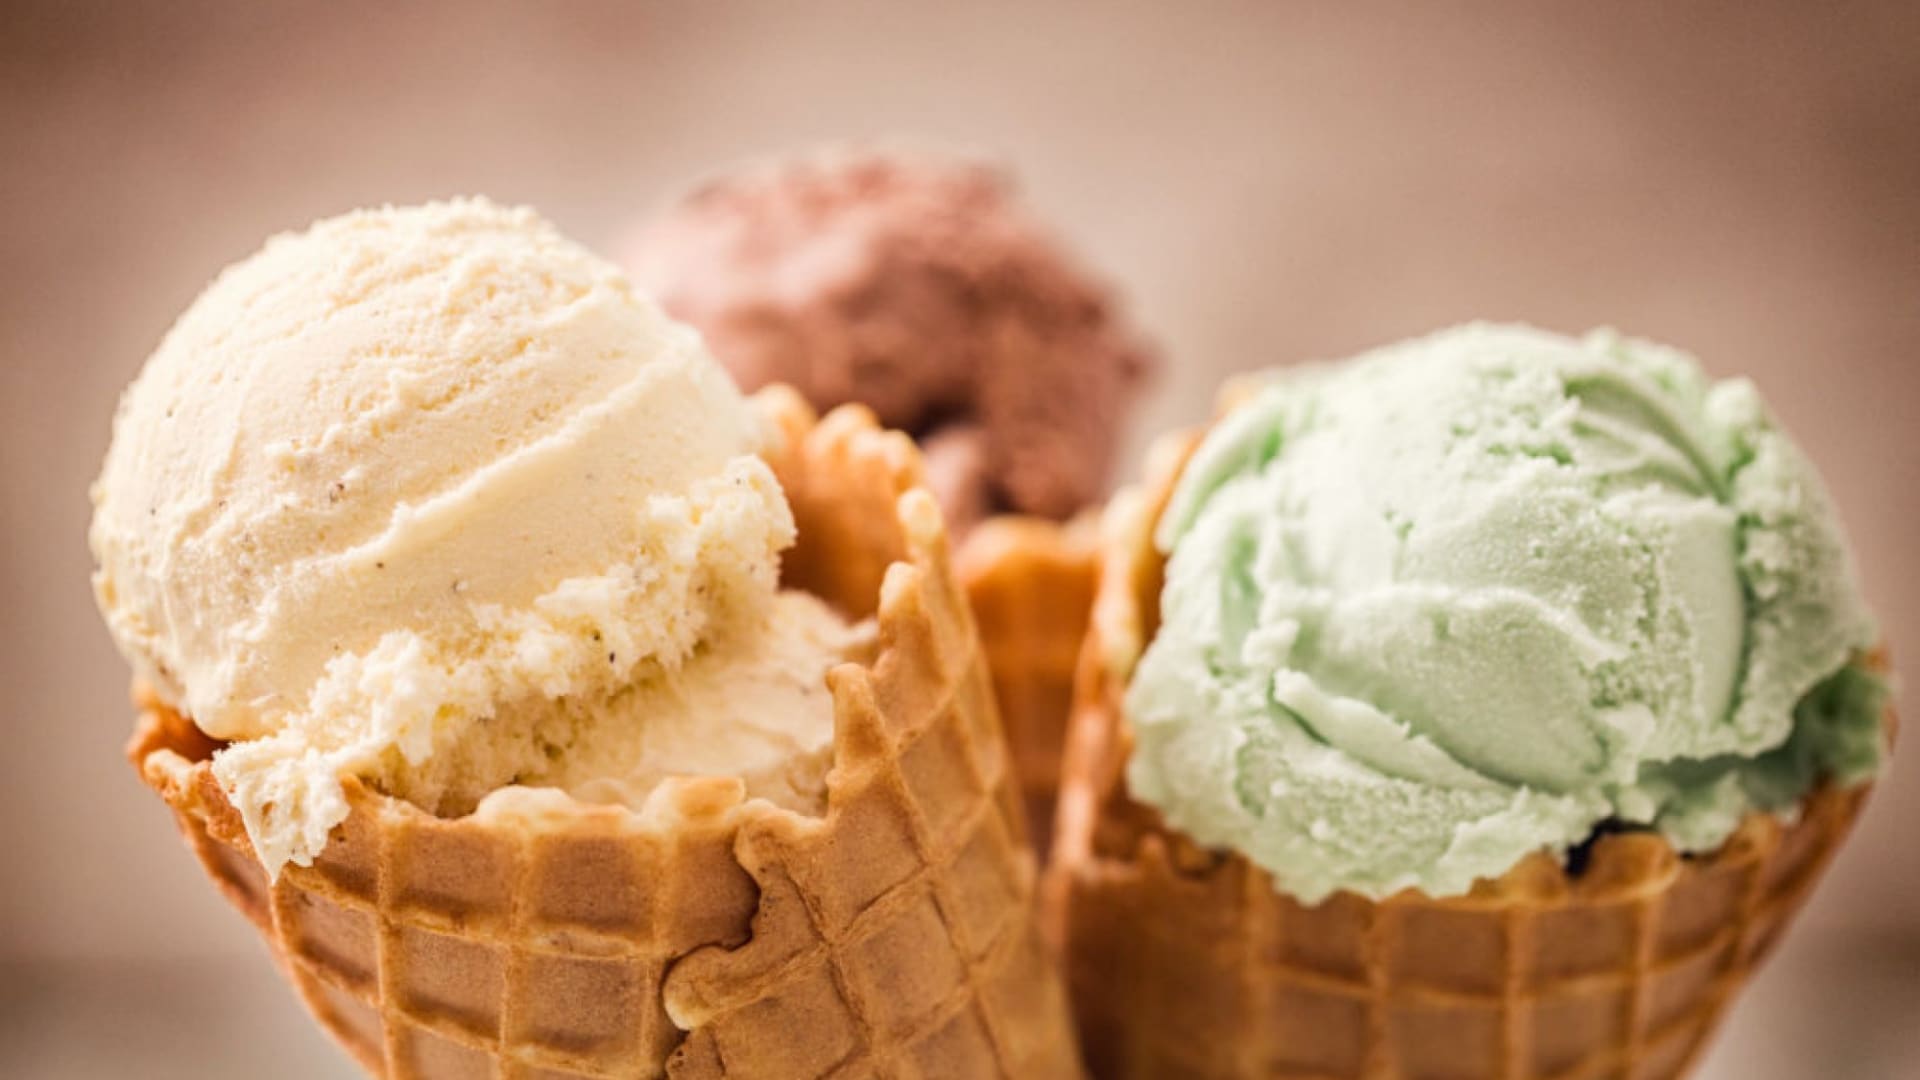 Desperate for Staff, This Ice Cream Shop Owner Made an Unusual Decision. It's a Lesson in Emotional Intelligence